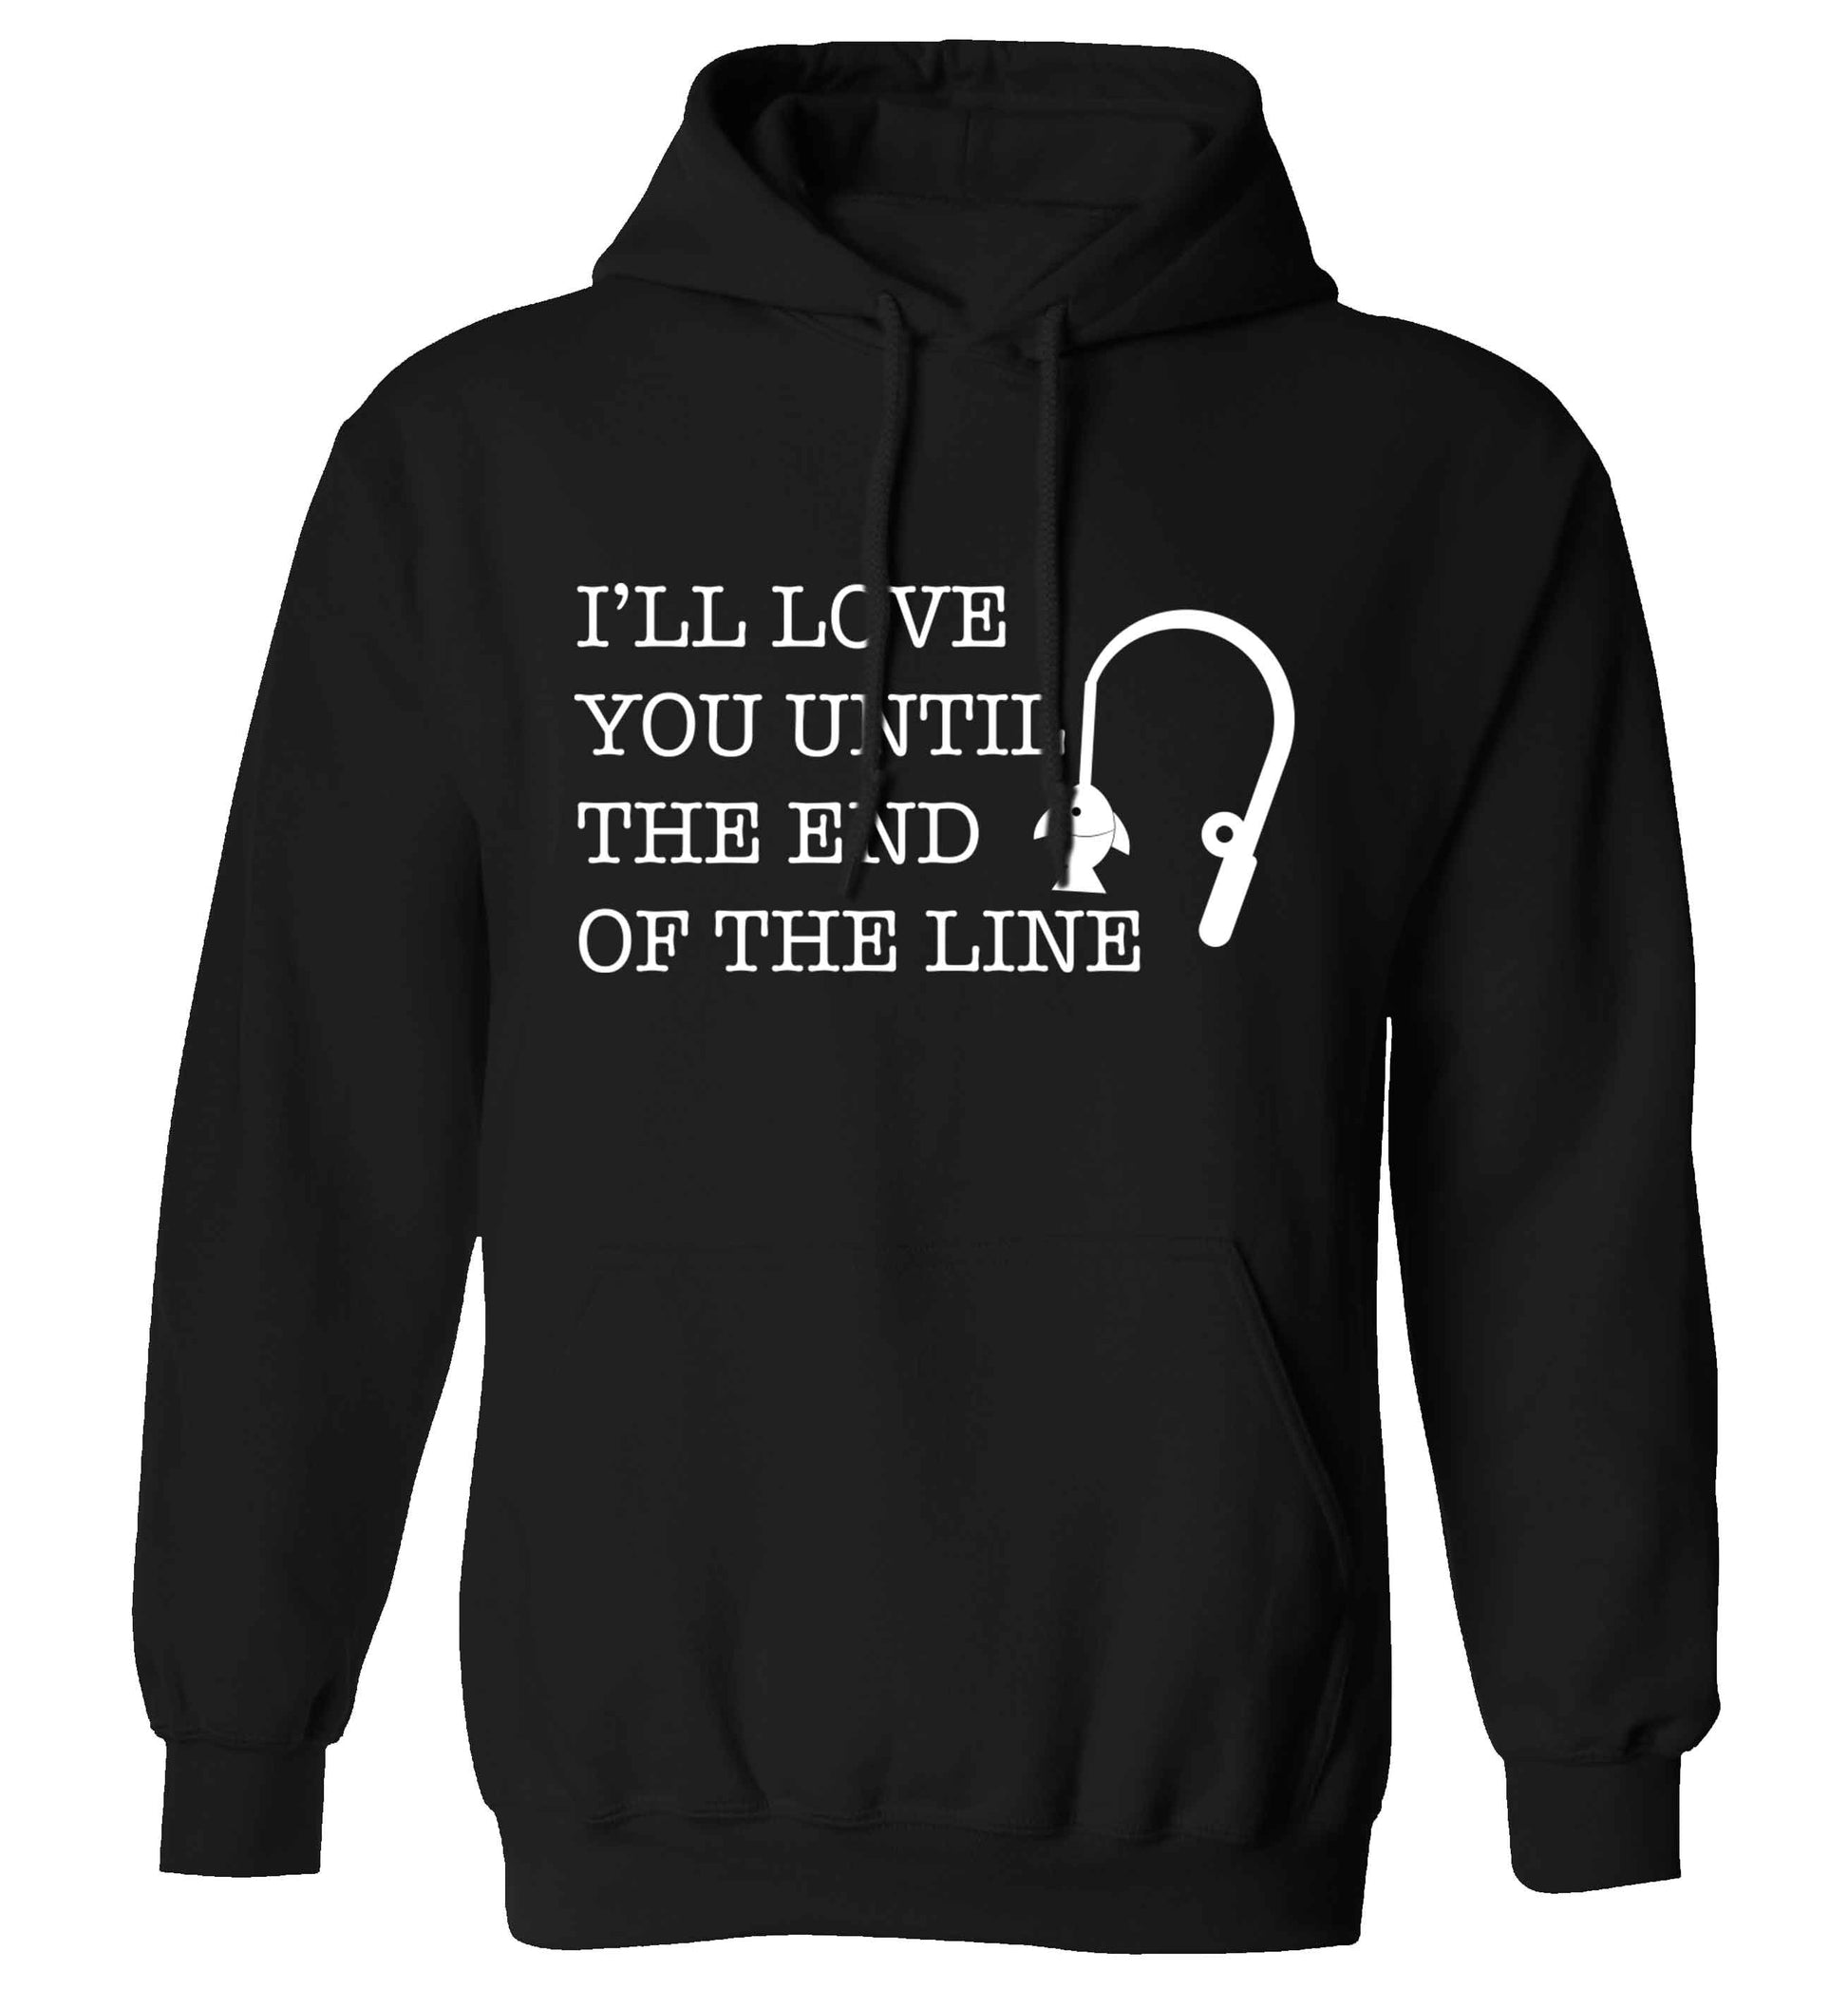 I'll love you until the end of the line adults unisex black hoodie 2XL